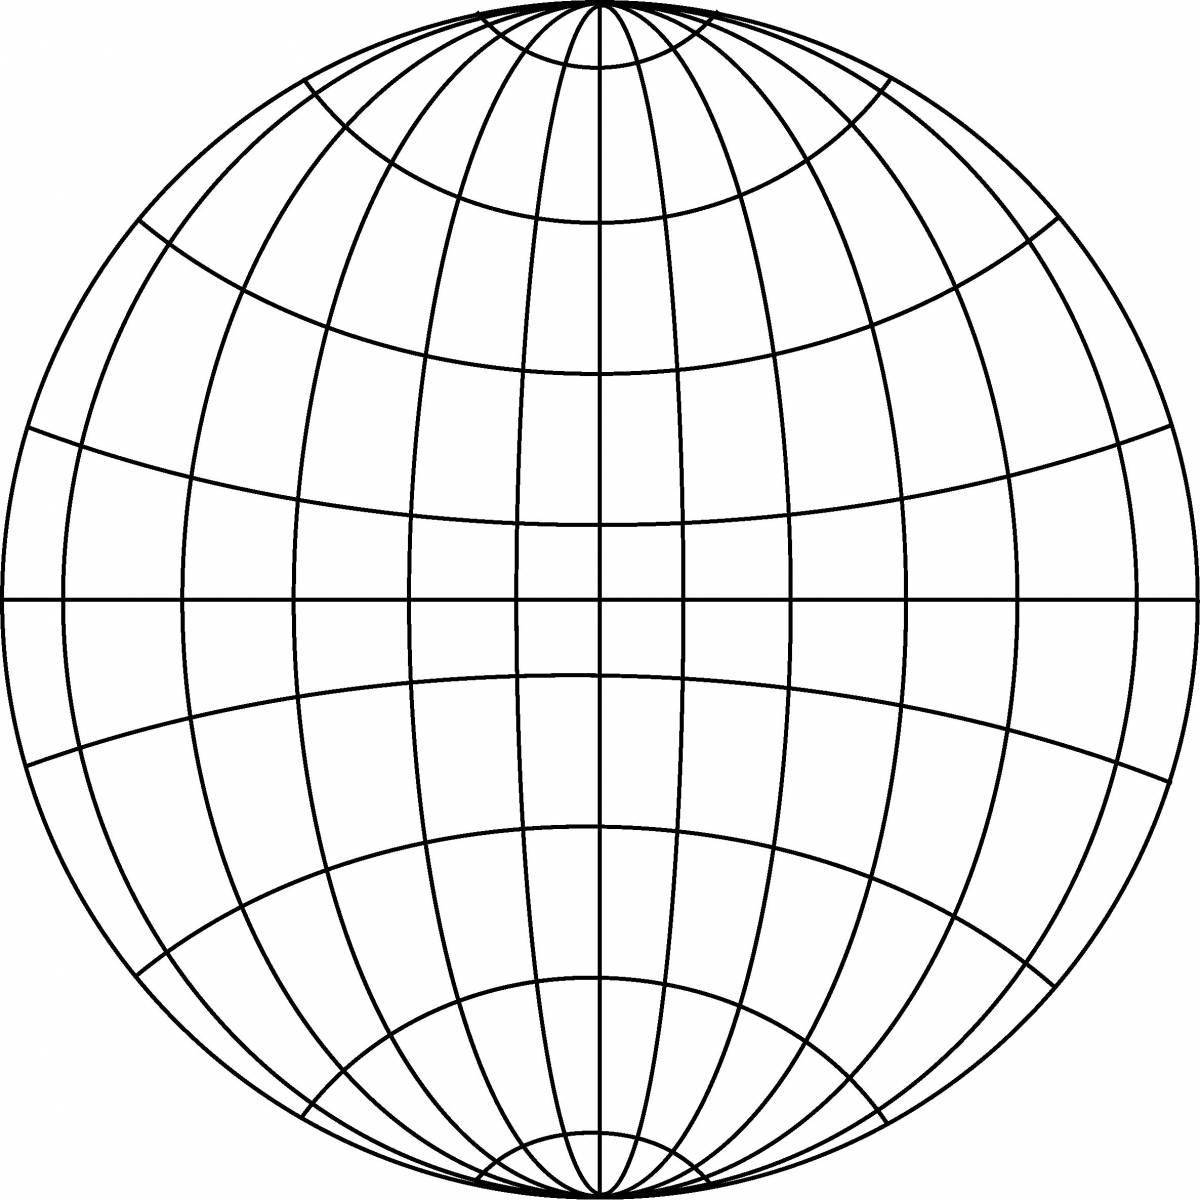 Amazing equator coloring page